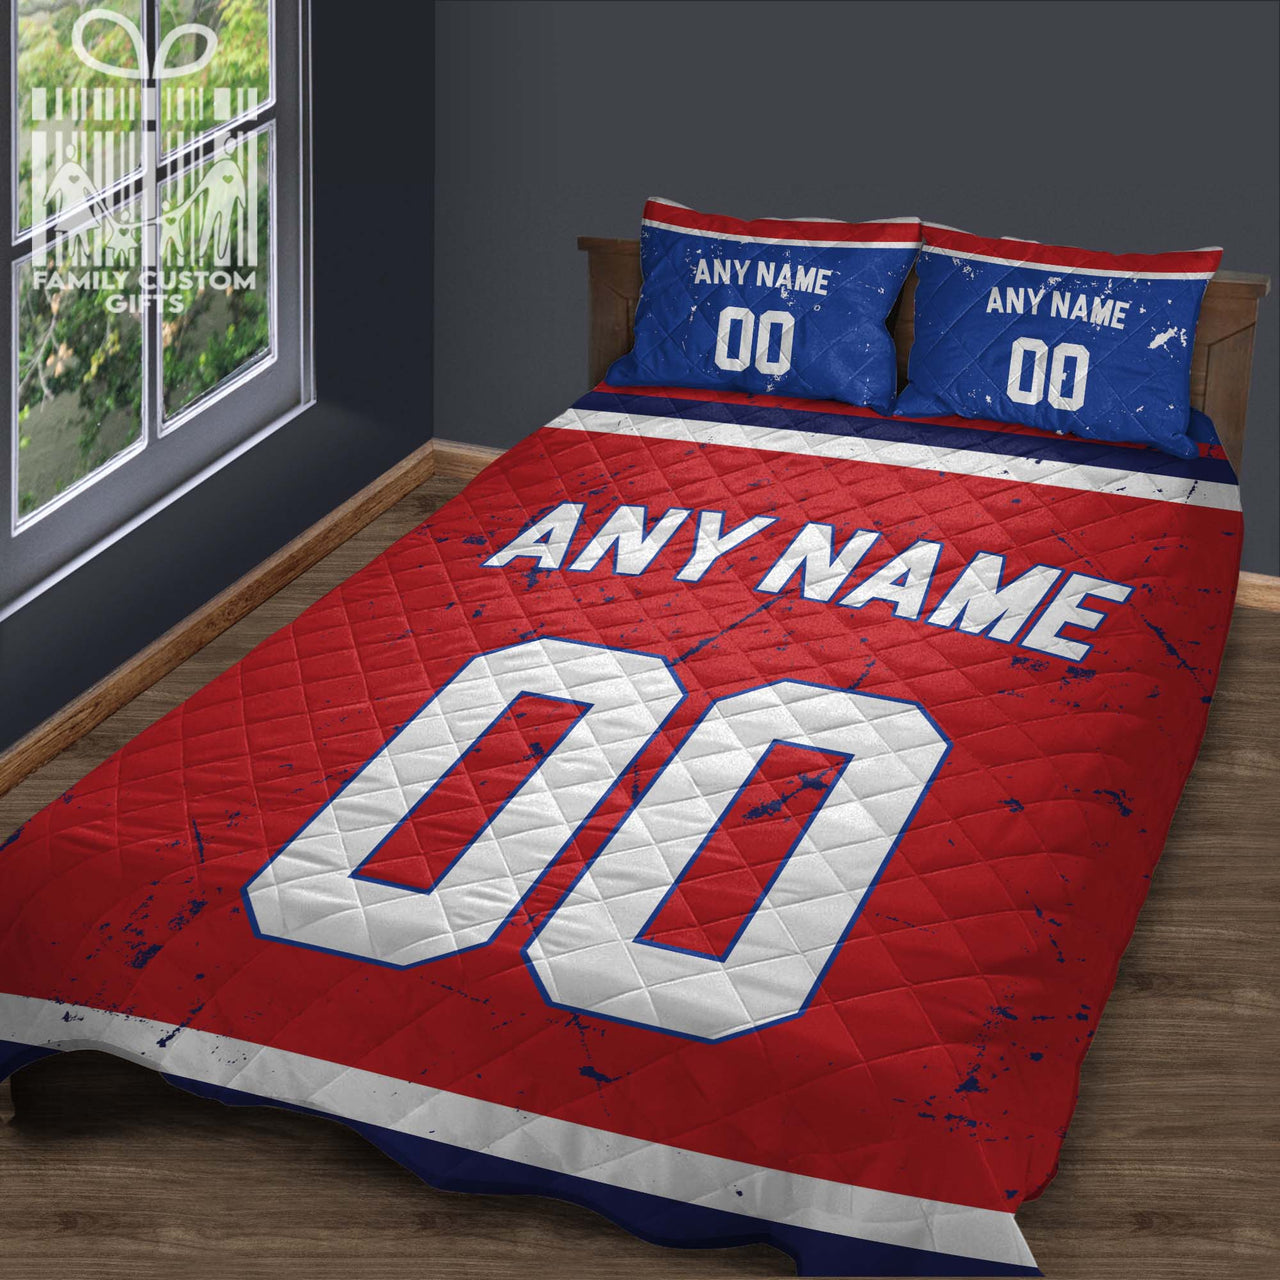 Custom Quilt Sets Montreal Jersey Personalized Ice hockey Premium Quilt Bedding for Men Women